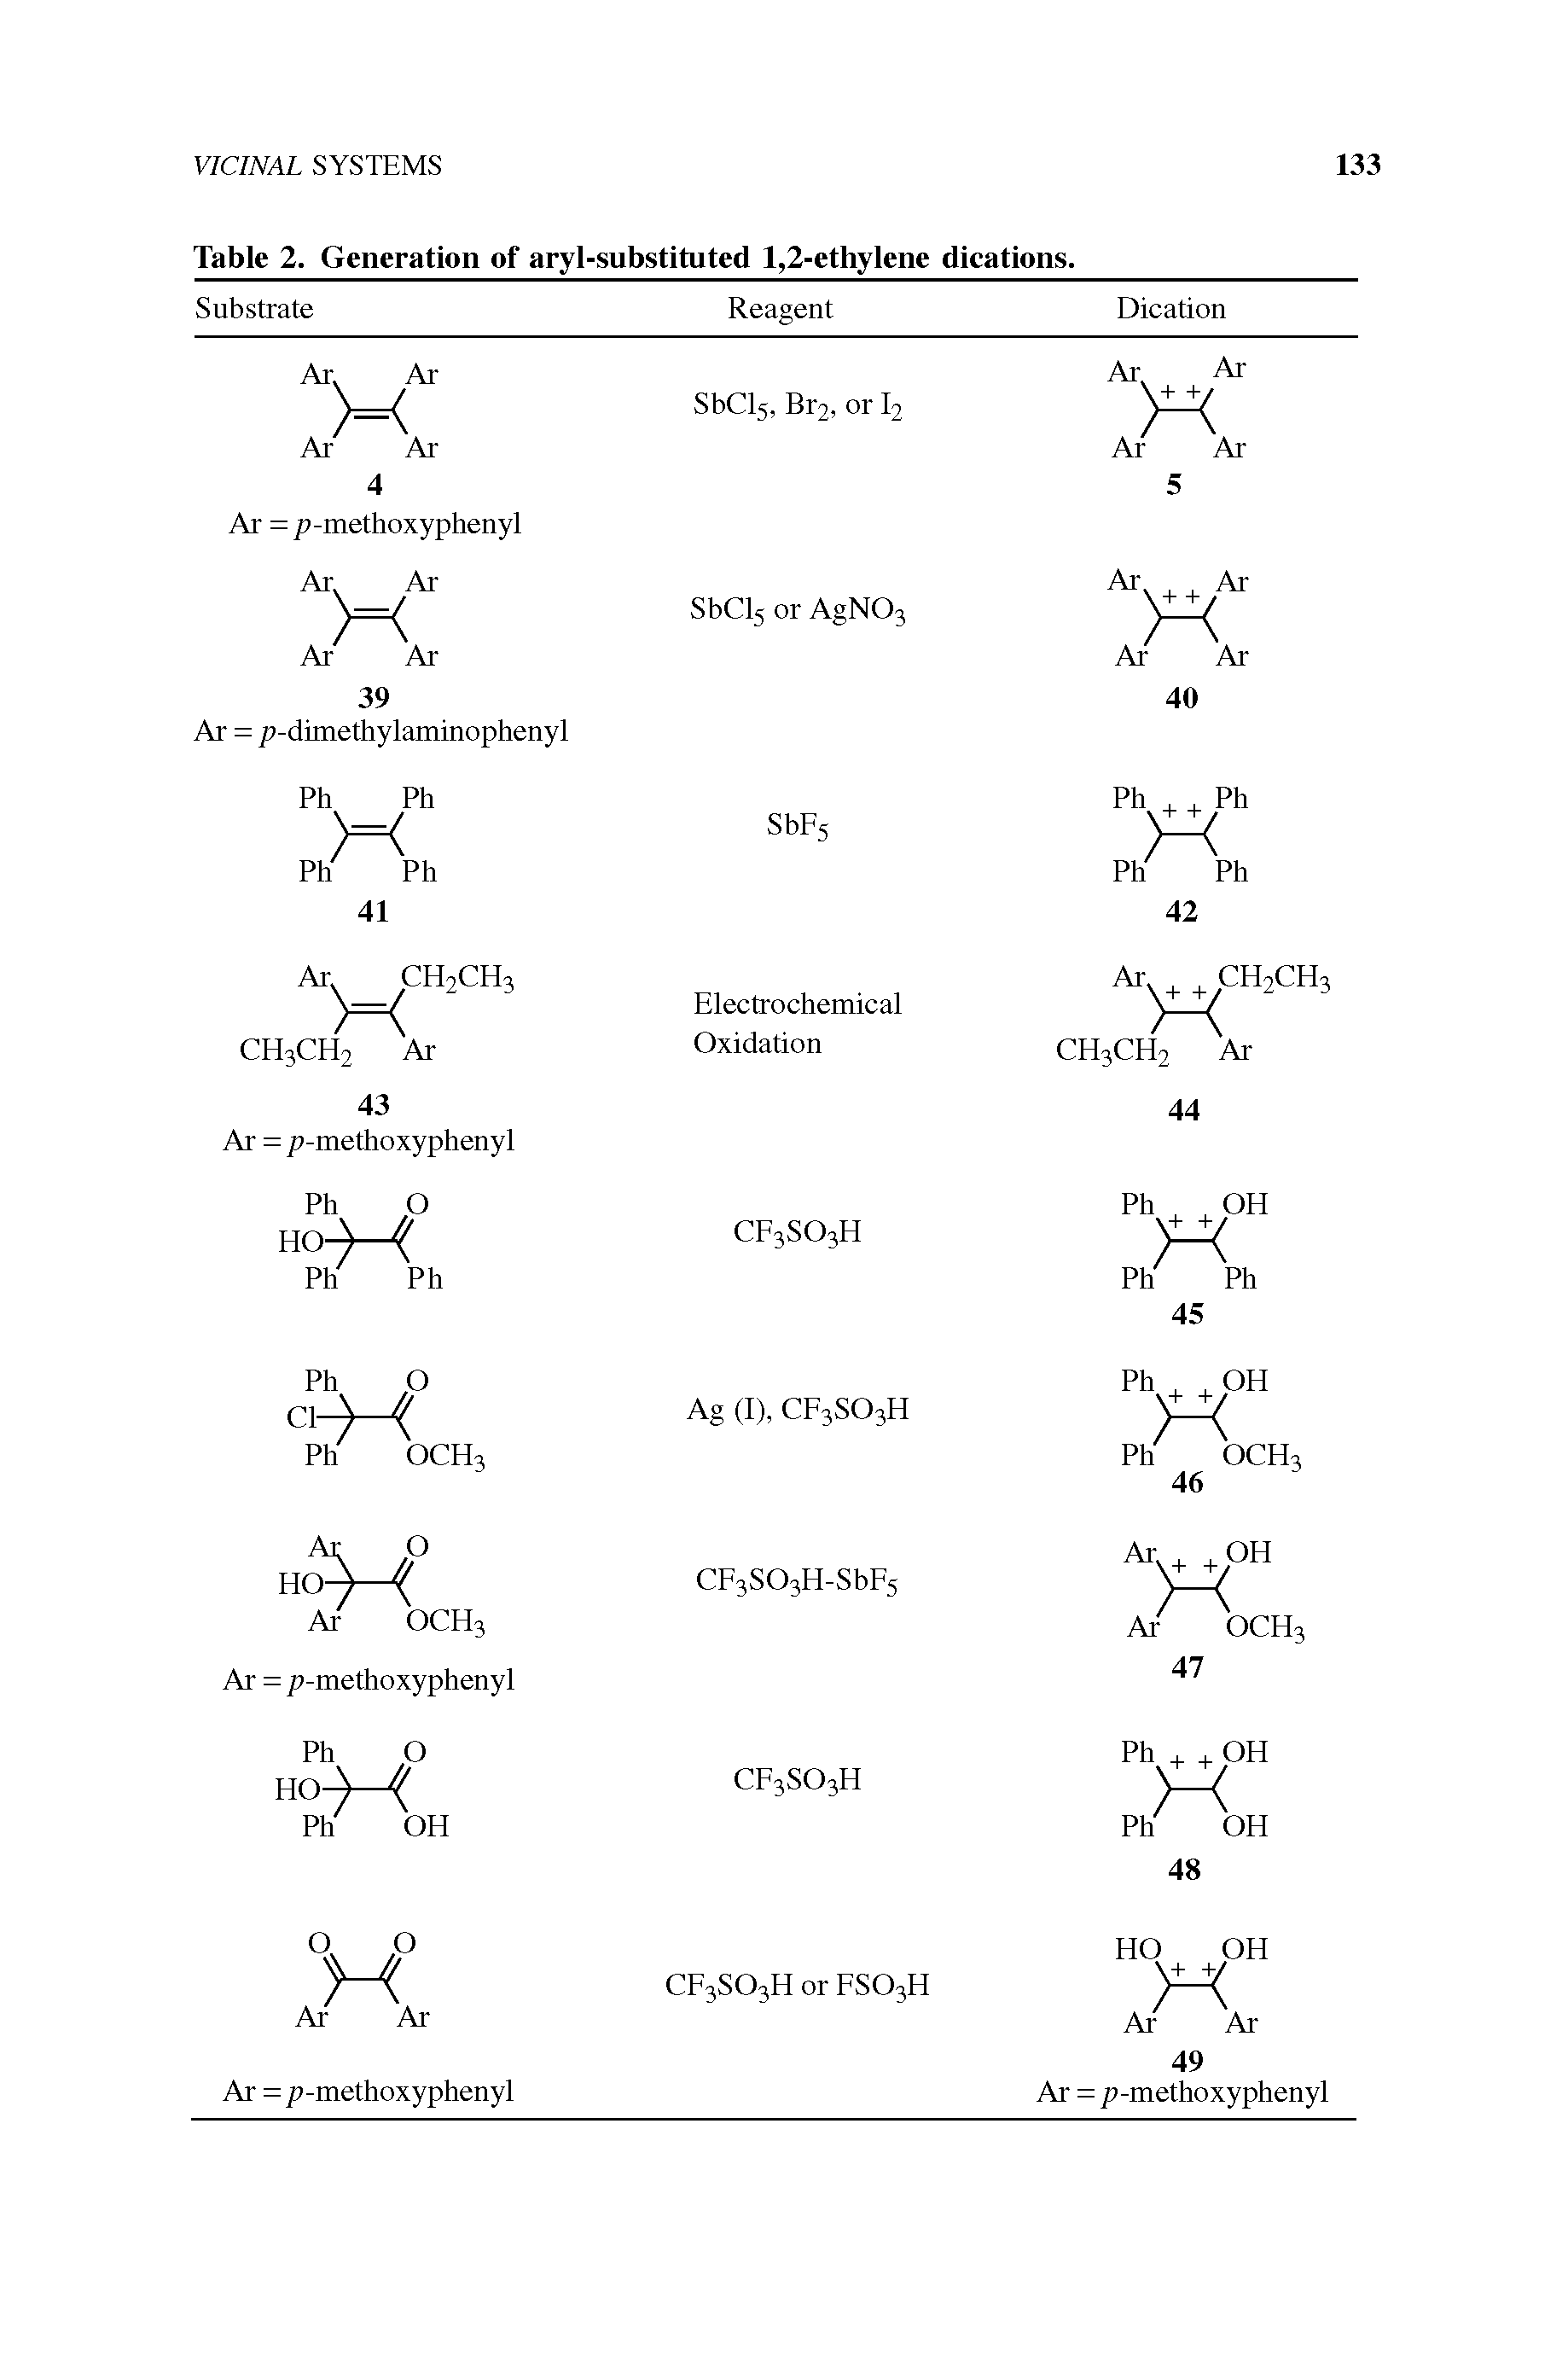 Table 2. Generation of aryl-substituted 1,2-ethylene dications.